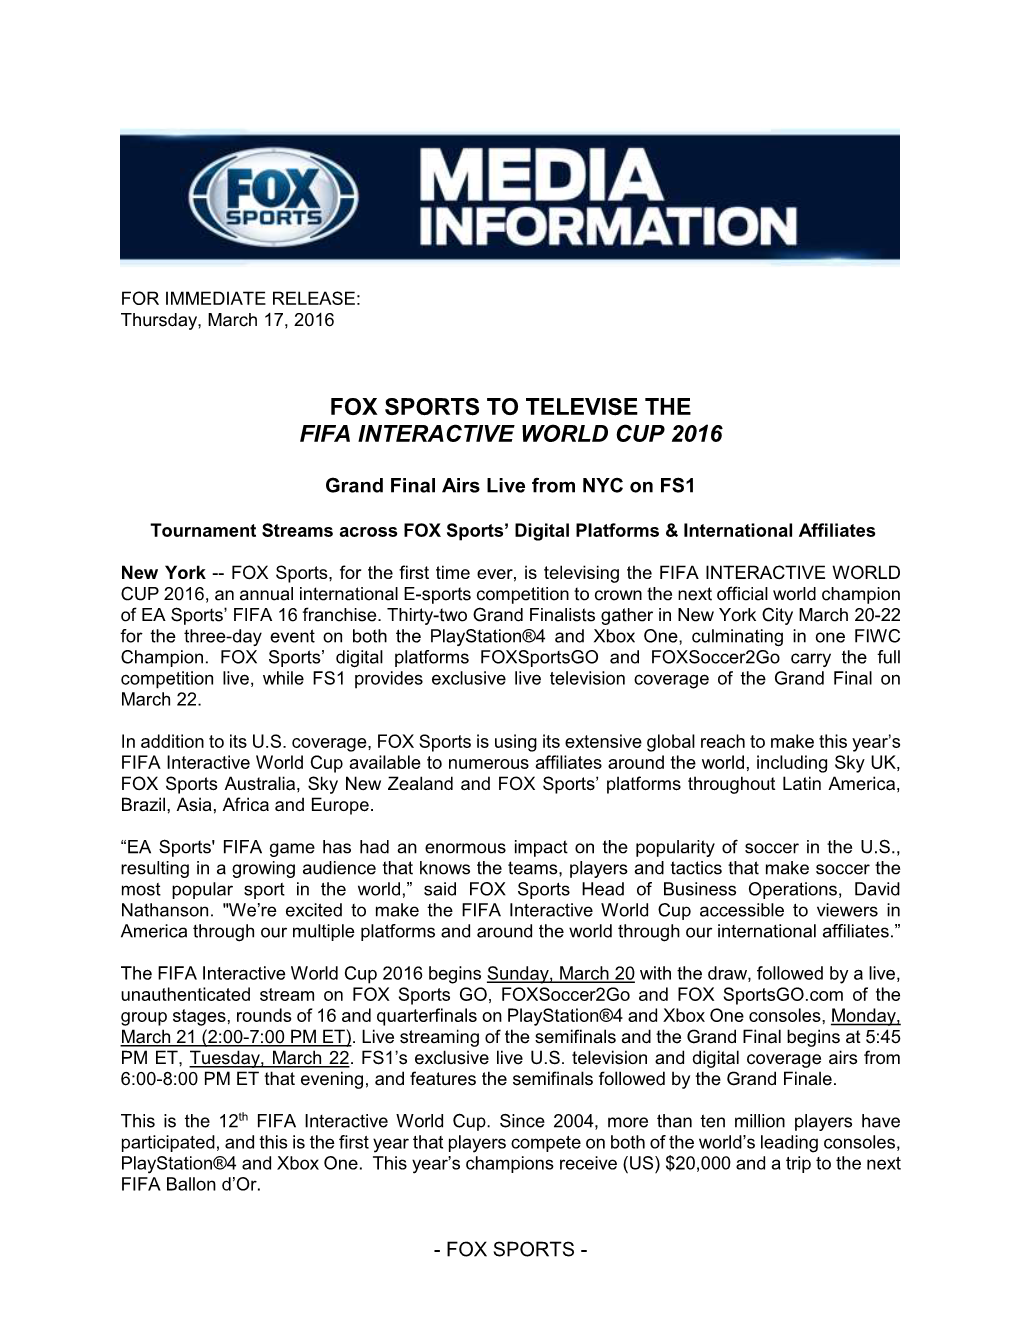 Fox Sports to Televise the Fifa Interactive World Cup 2016